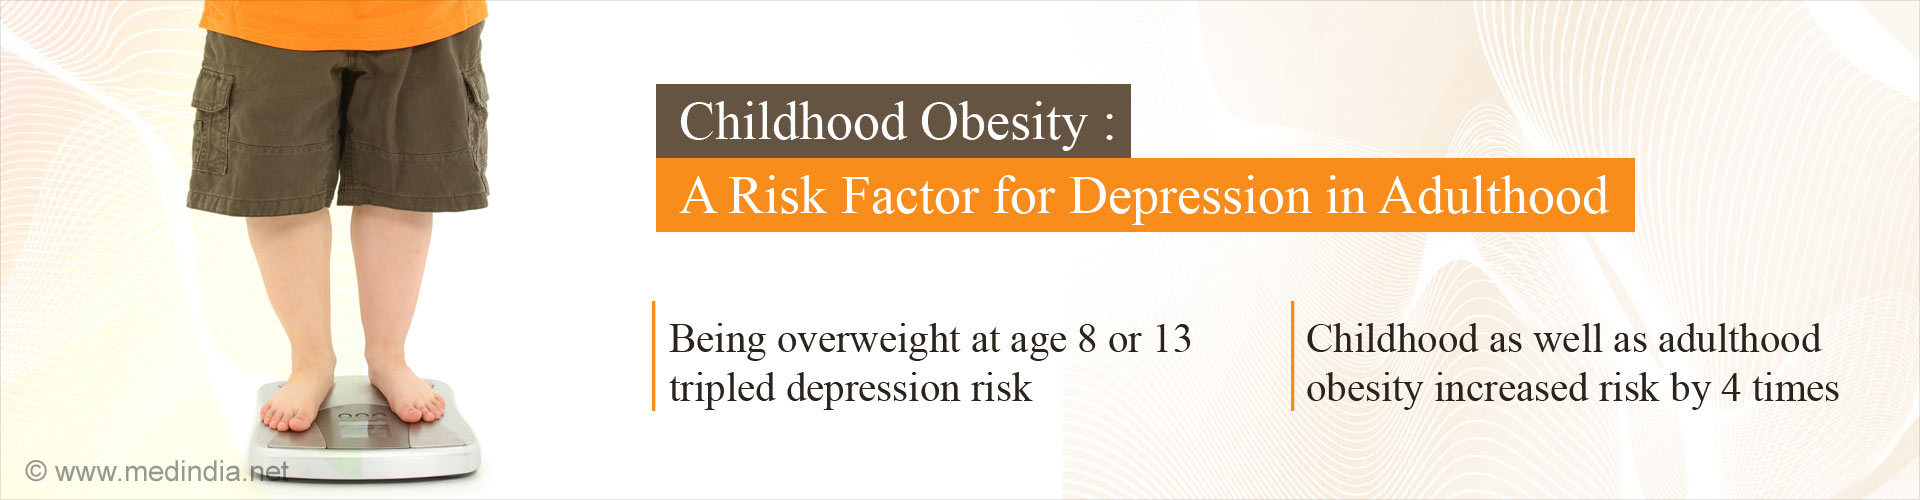 Childhood obesity: A risk factor for depression in adulthood
- Being overweight at age 8 or 13 tripled depression risk
- Childhood as well as adulthood obesity increased risk by 4 times